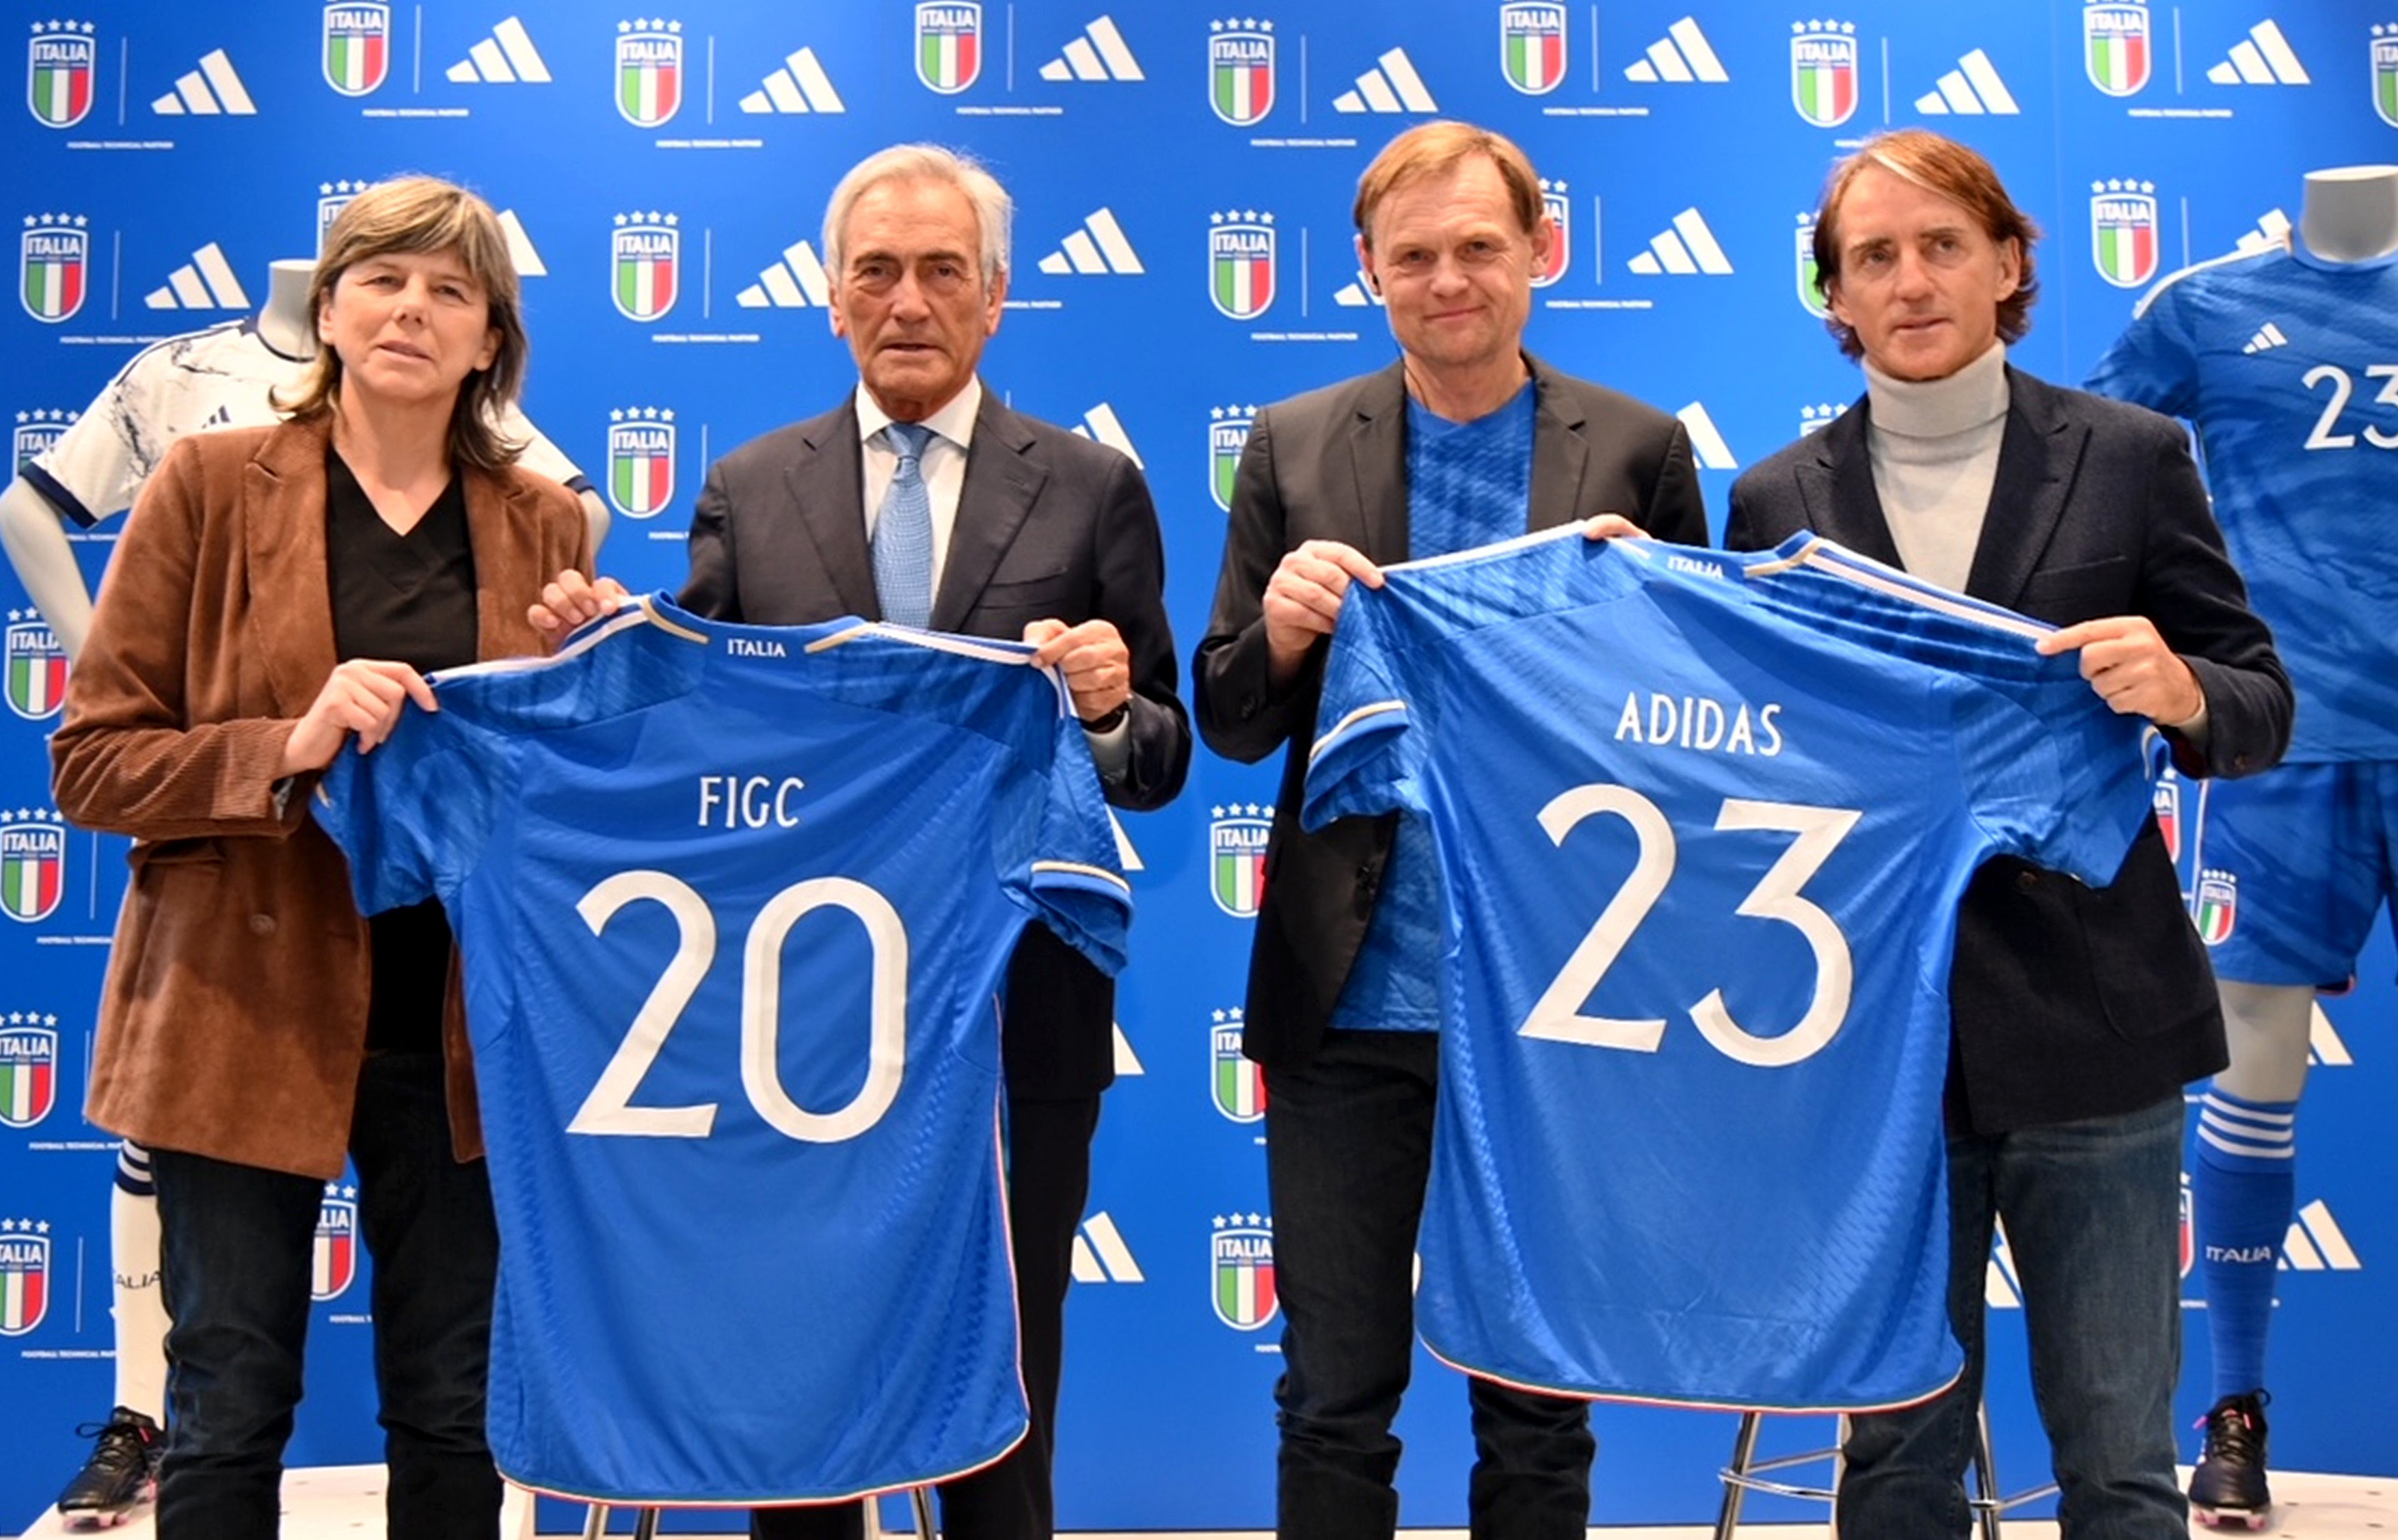 Mal extraer Mujer Presentation of the FIGC-adidas partnership. Gravina: "Today a new era  begins for Italian football: we hope to have success together". | FIGC